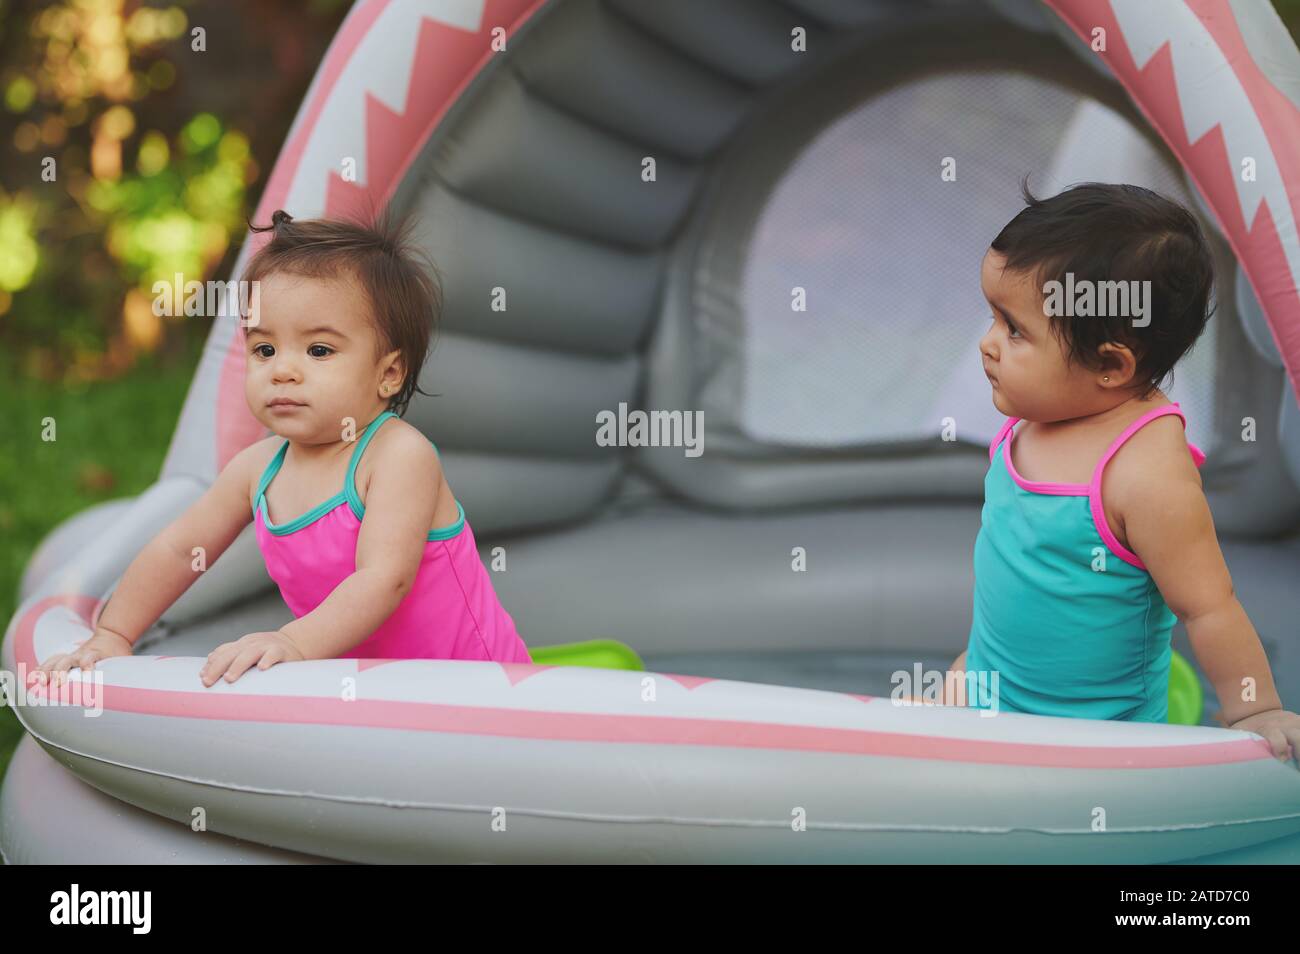 Two kids on rubber swimming pool on house backyard Stock Photo